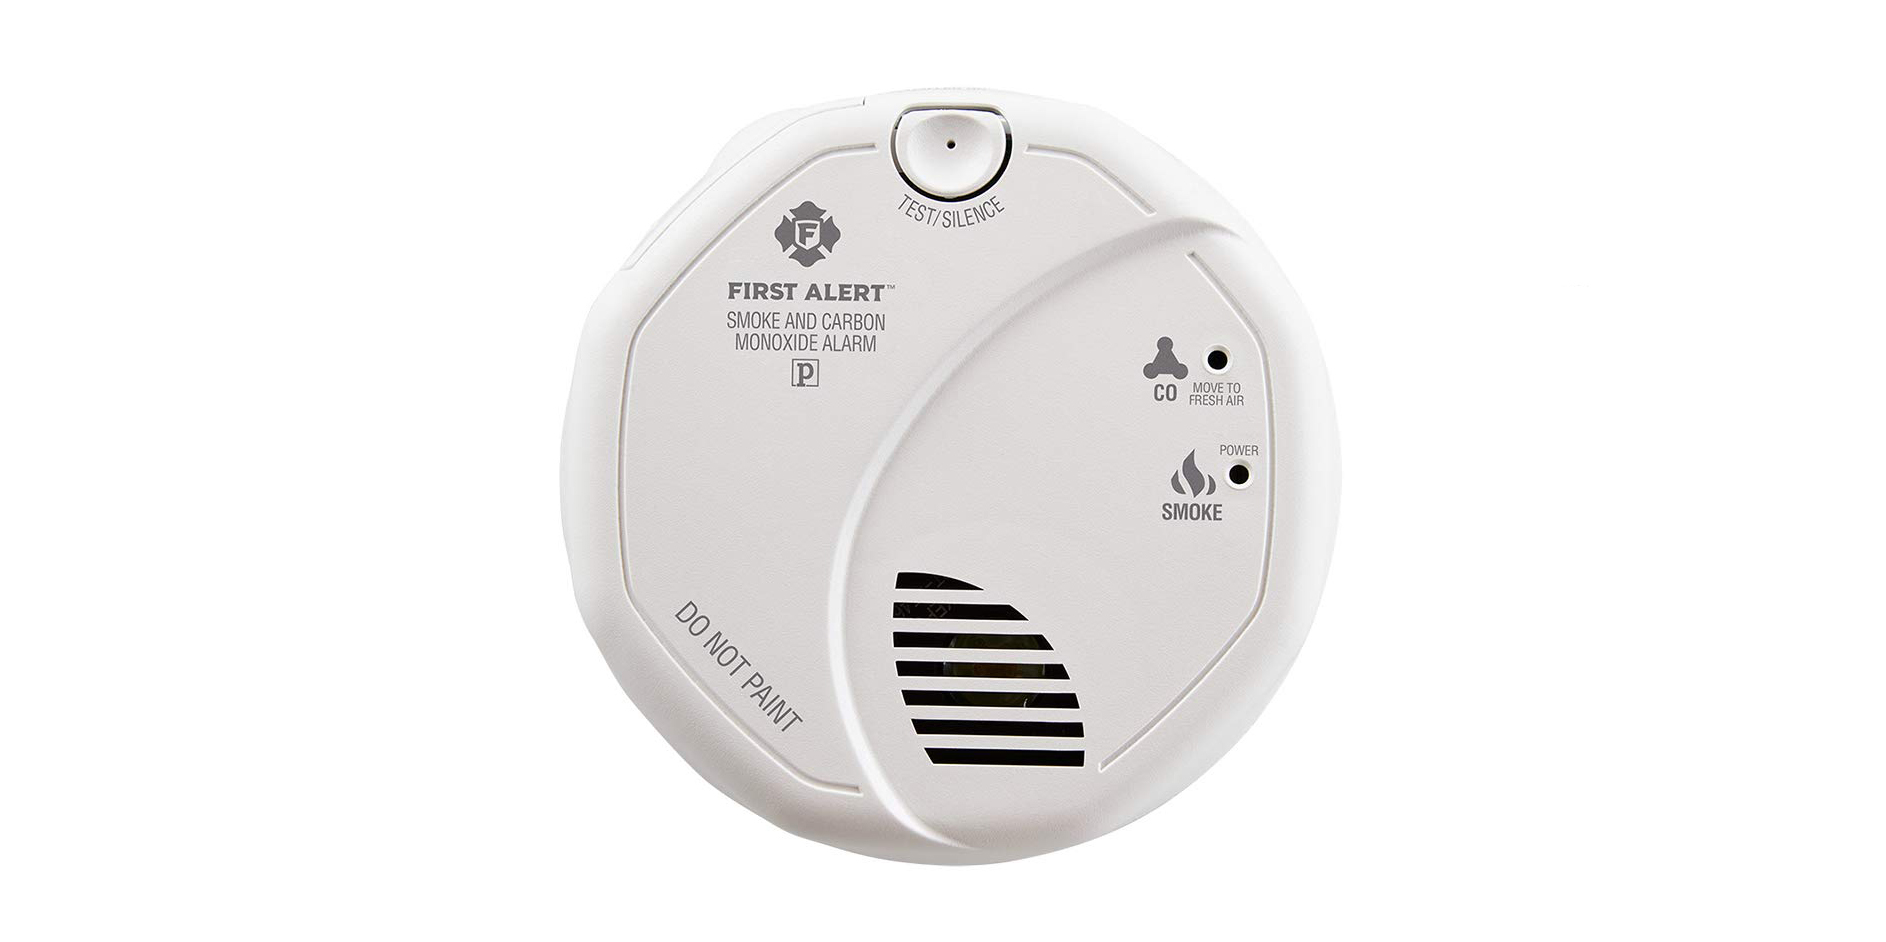 First Alert Smoke and CO alarms on sale today at Amazon ...